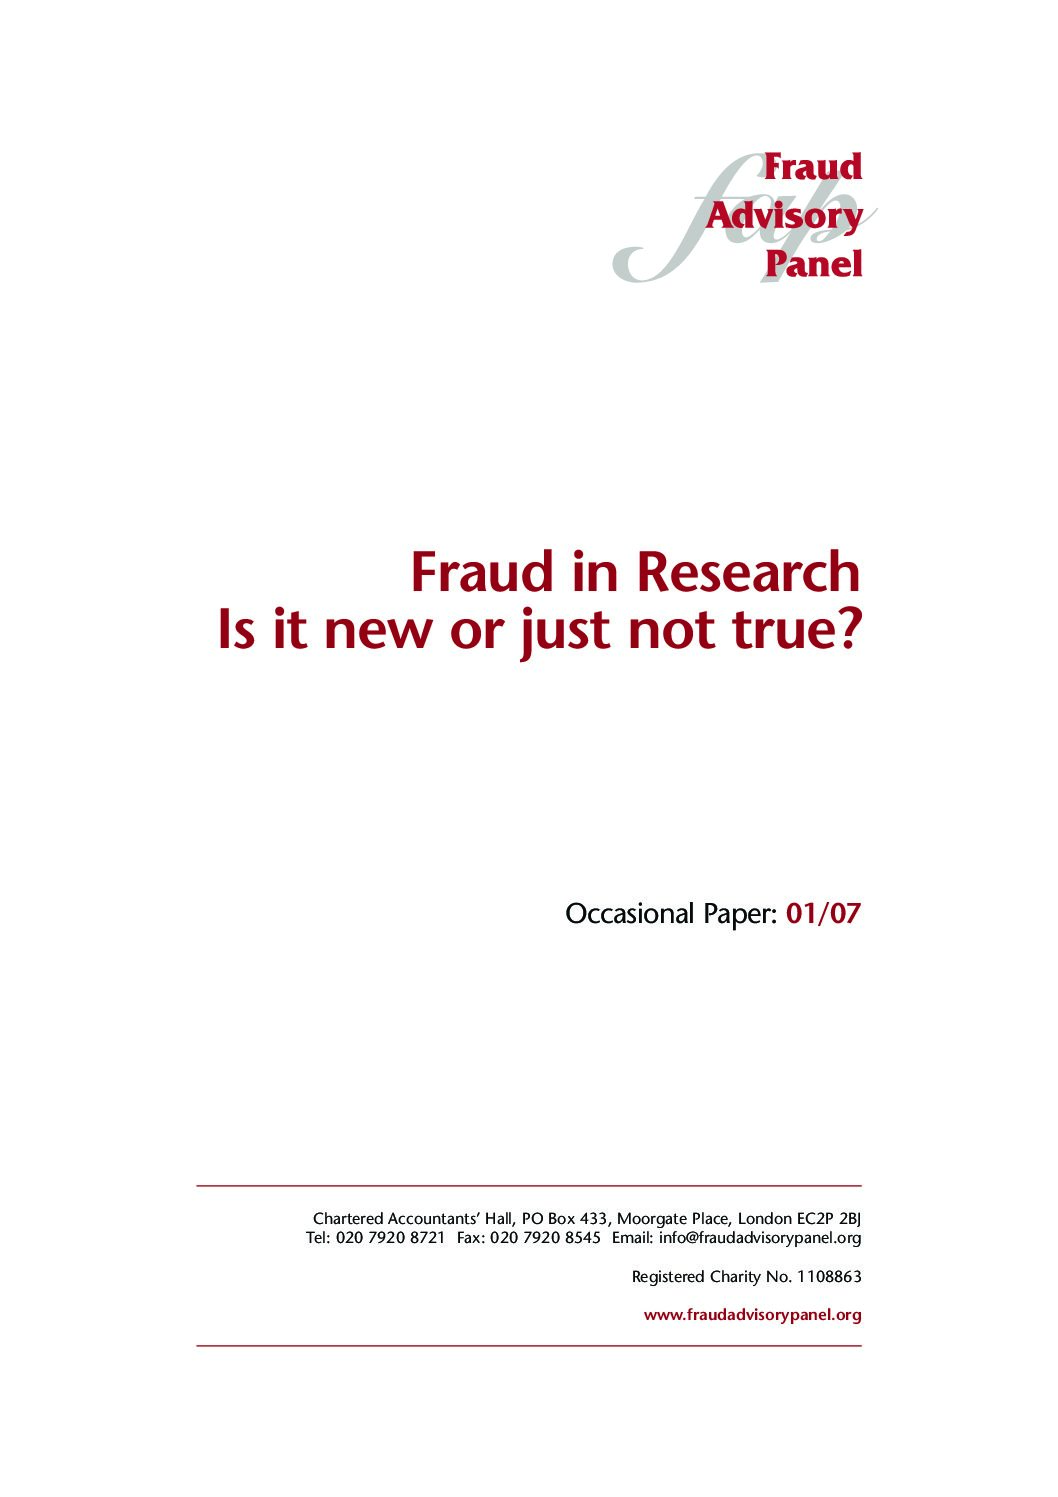 Fraud in Research (October07) document cover